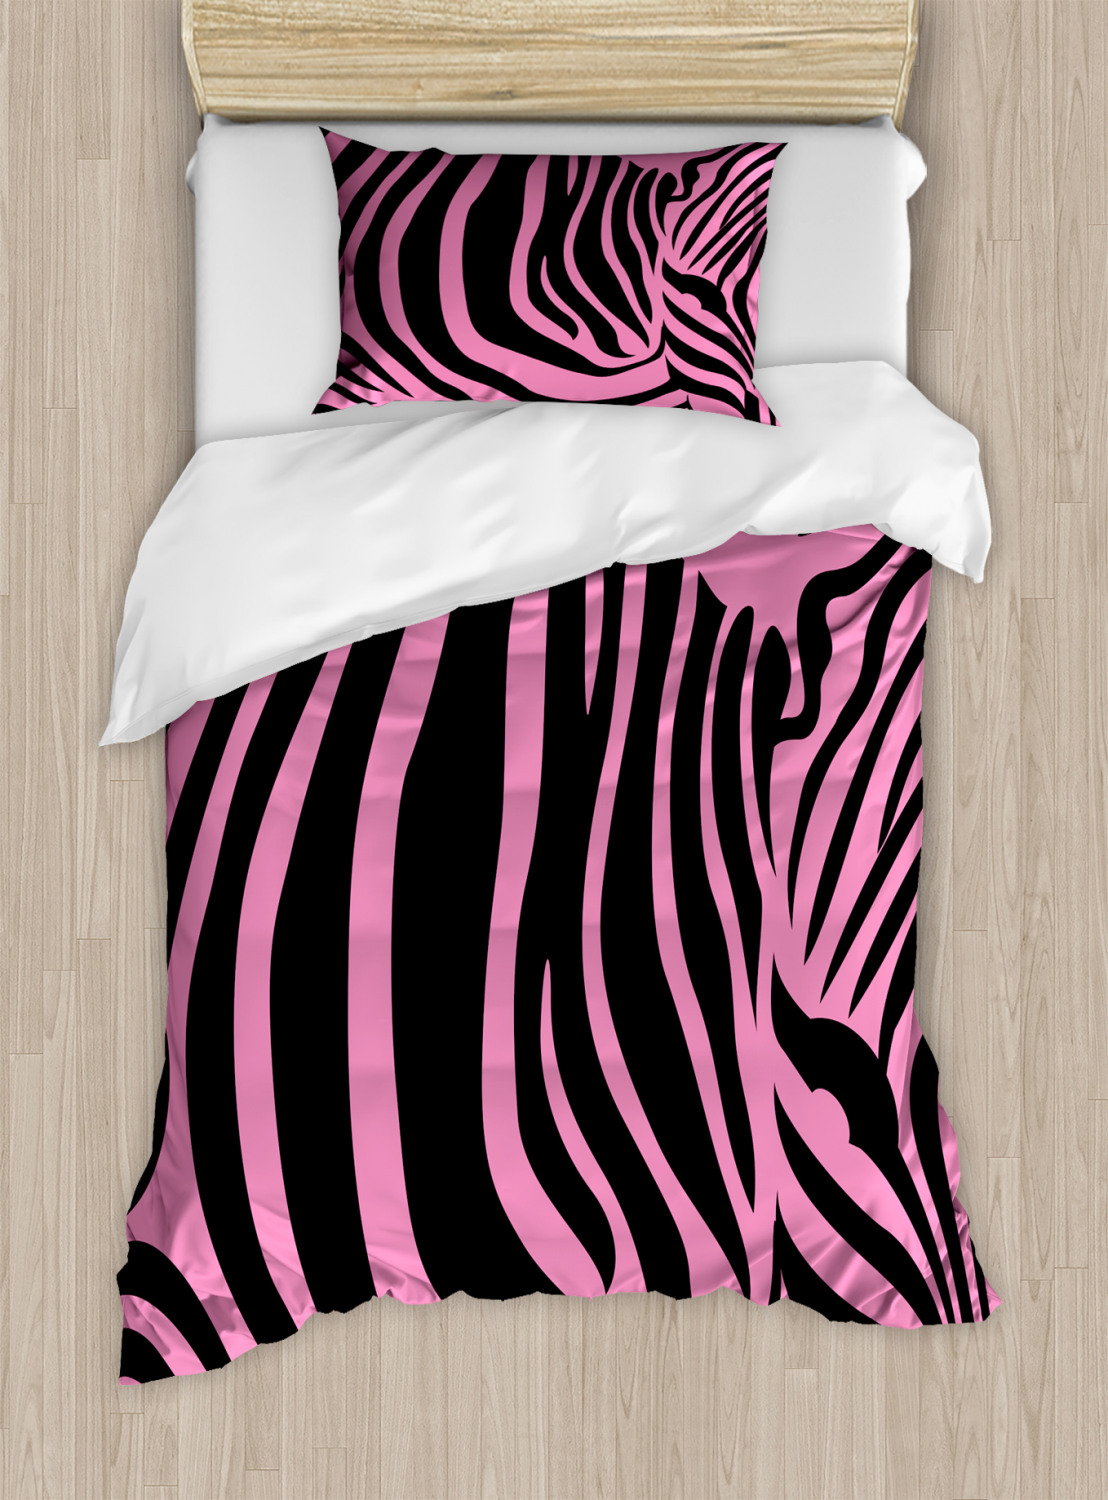 Pink Zebra Duvet Cover Set Twin Queen King Sizes with Pillow Shams ...